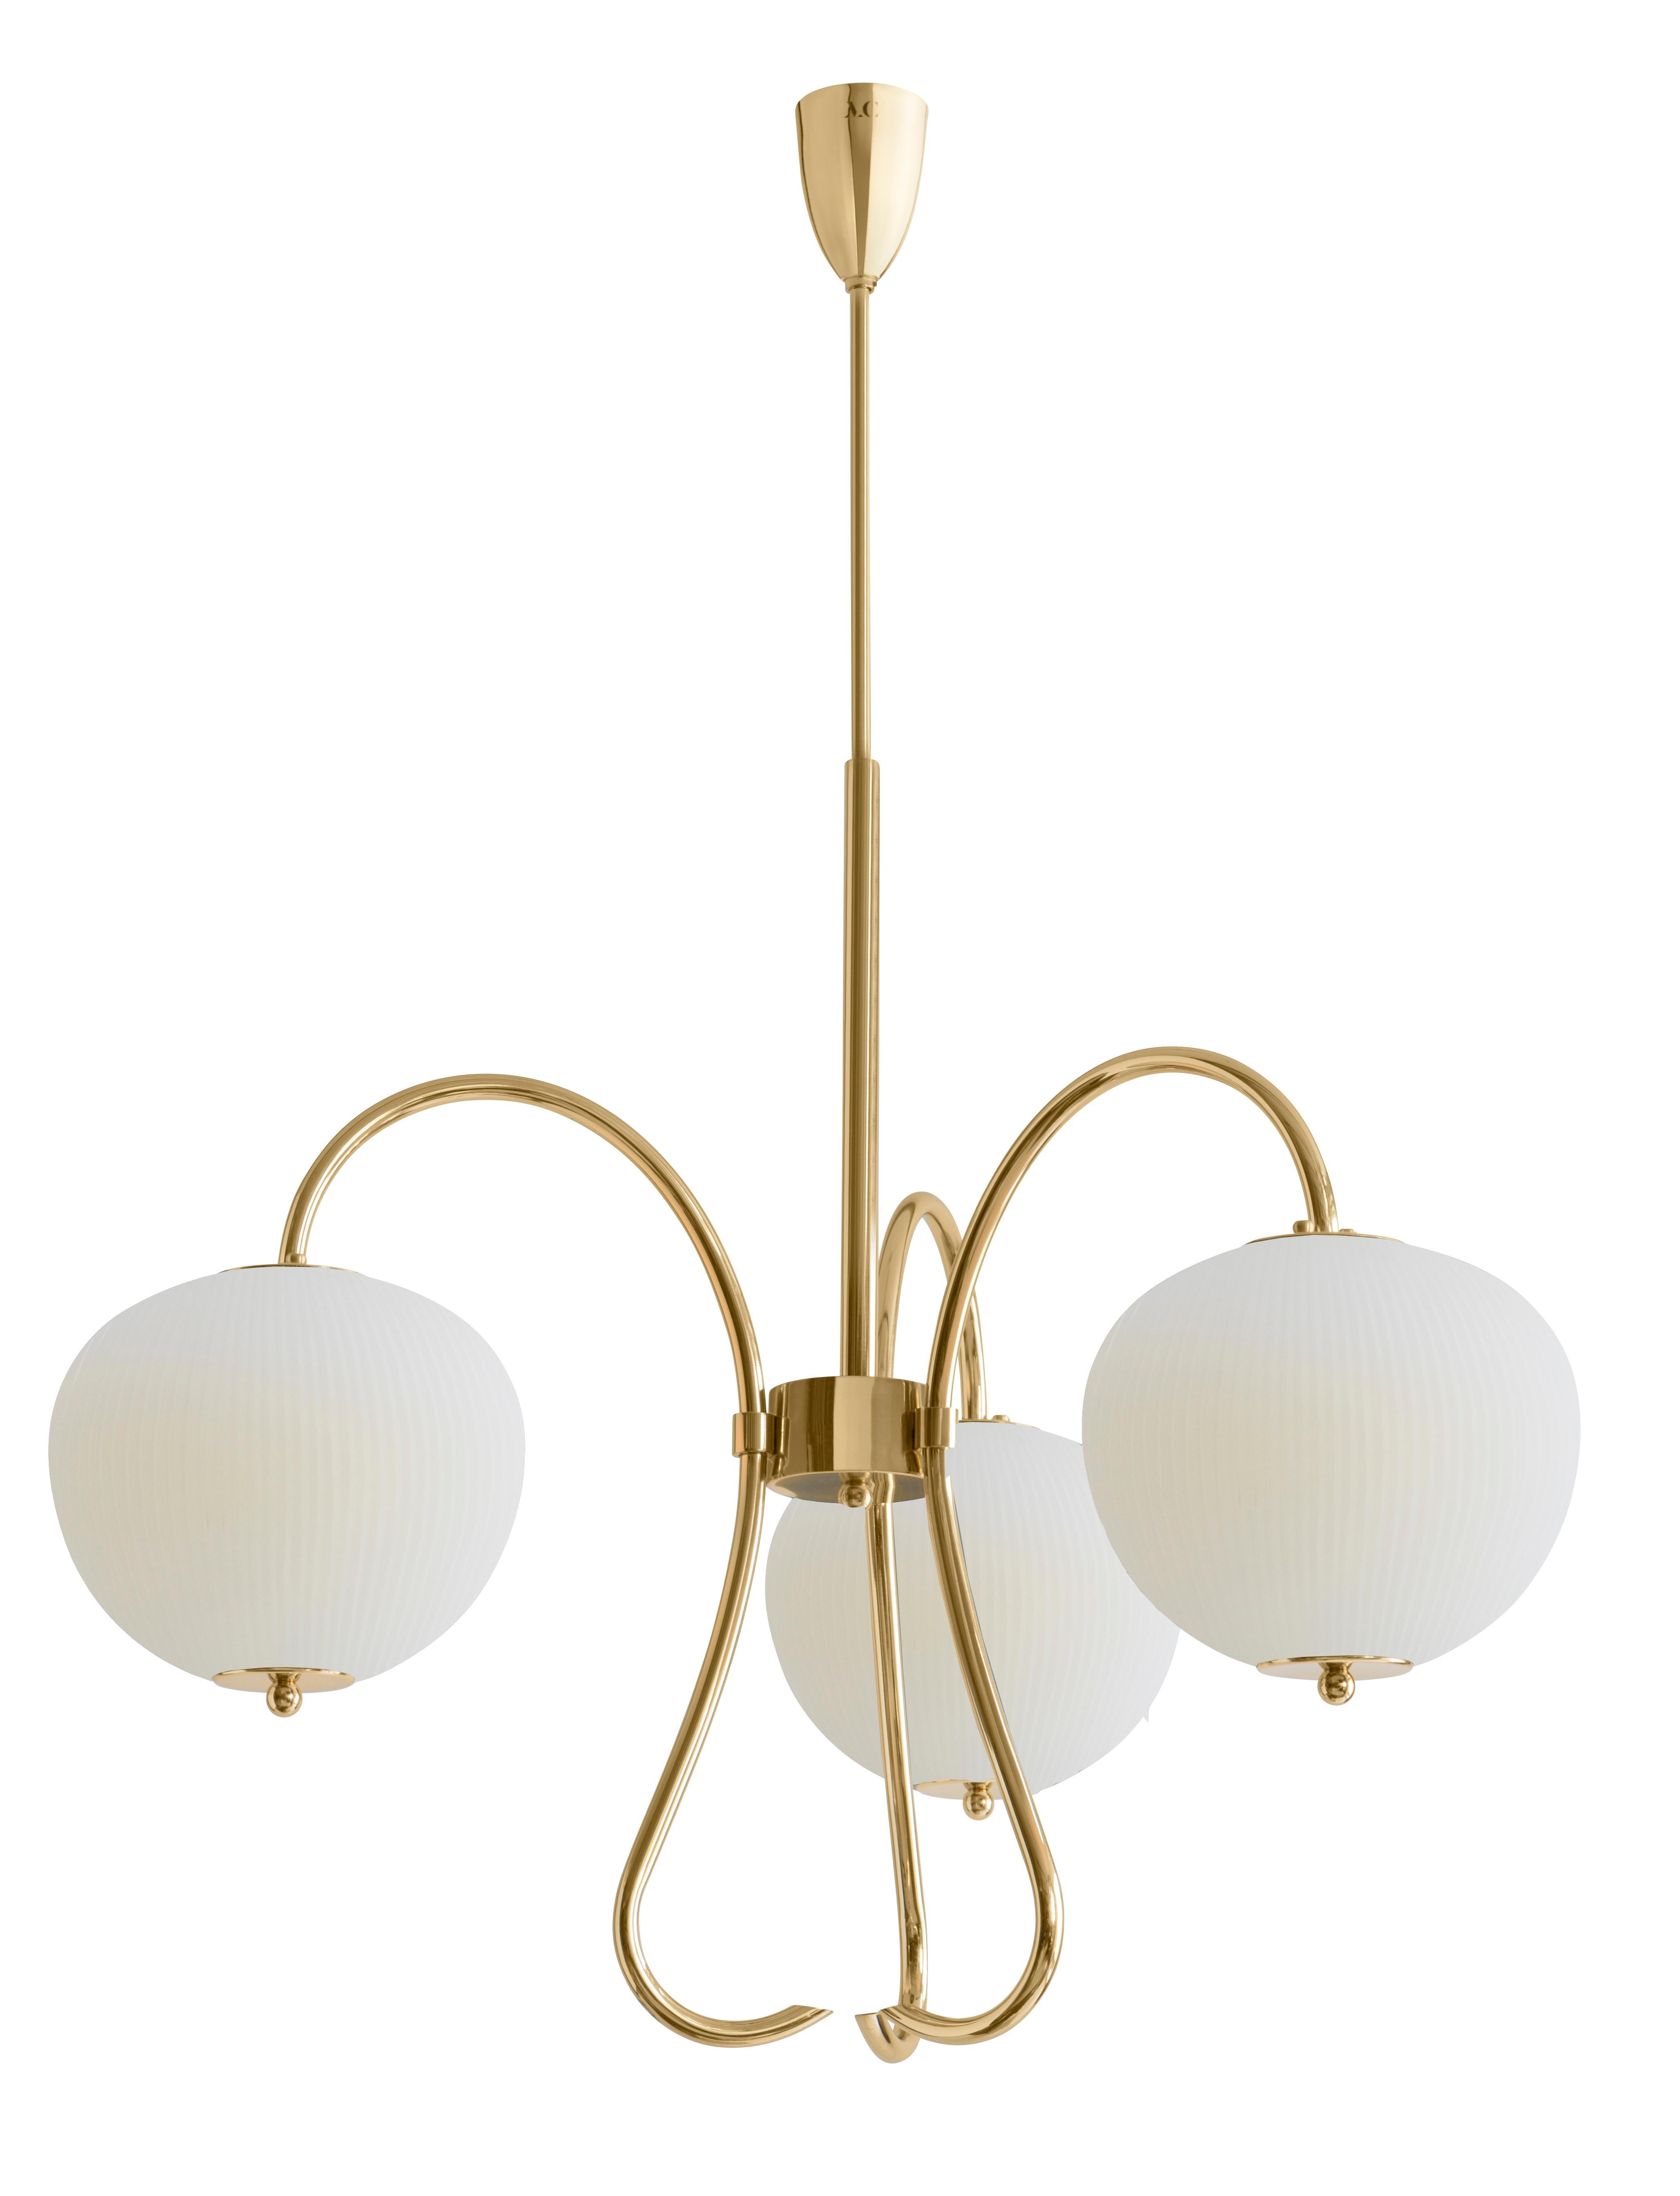 Triple chandelier China 03 by Magic Circus Editions.
Dimensions: H 120 x W 81.5 x D 26.2 cm.
Materials: brass, mouth blown glass sculpted with a diamond saw.
Colour: ivory.

Available finishes: brass, nickel.
Available colours: enamel soft